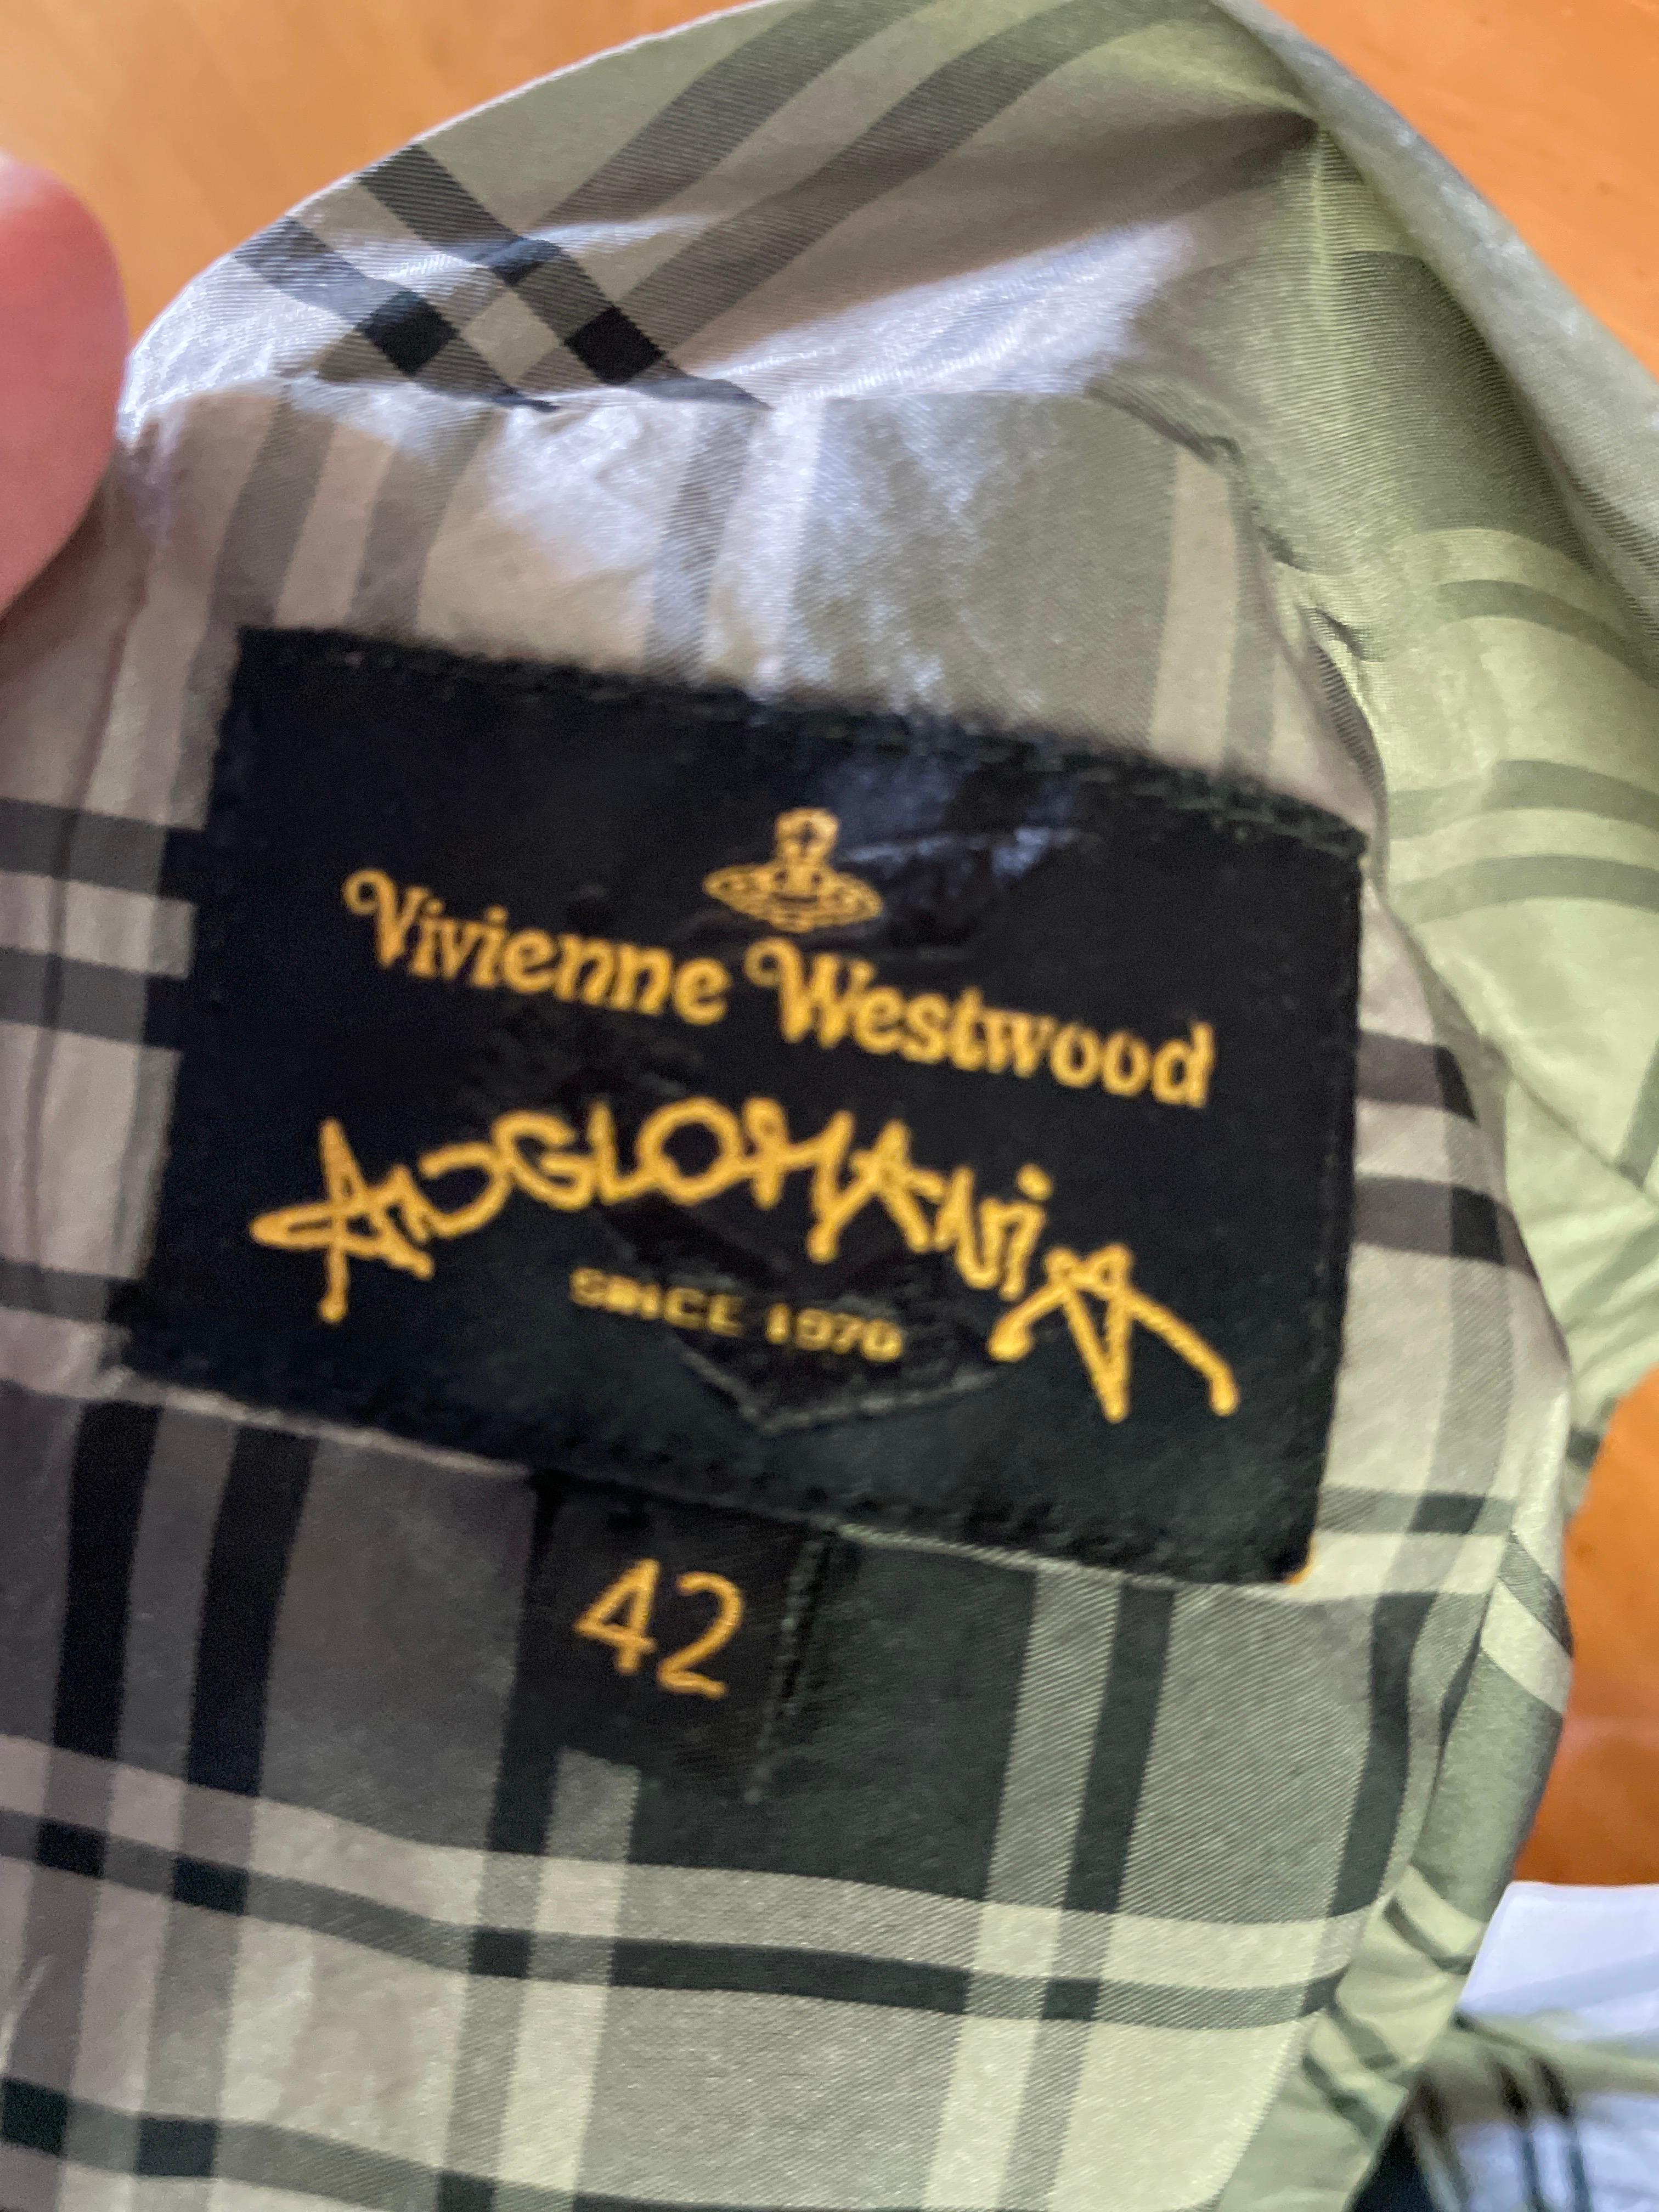 Vivienne Westwood Plaid Taffeta Day Dress for Anglomania Size 42 In Excellent Condition For Sale In Cloverdale, CA